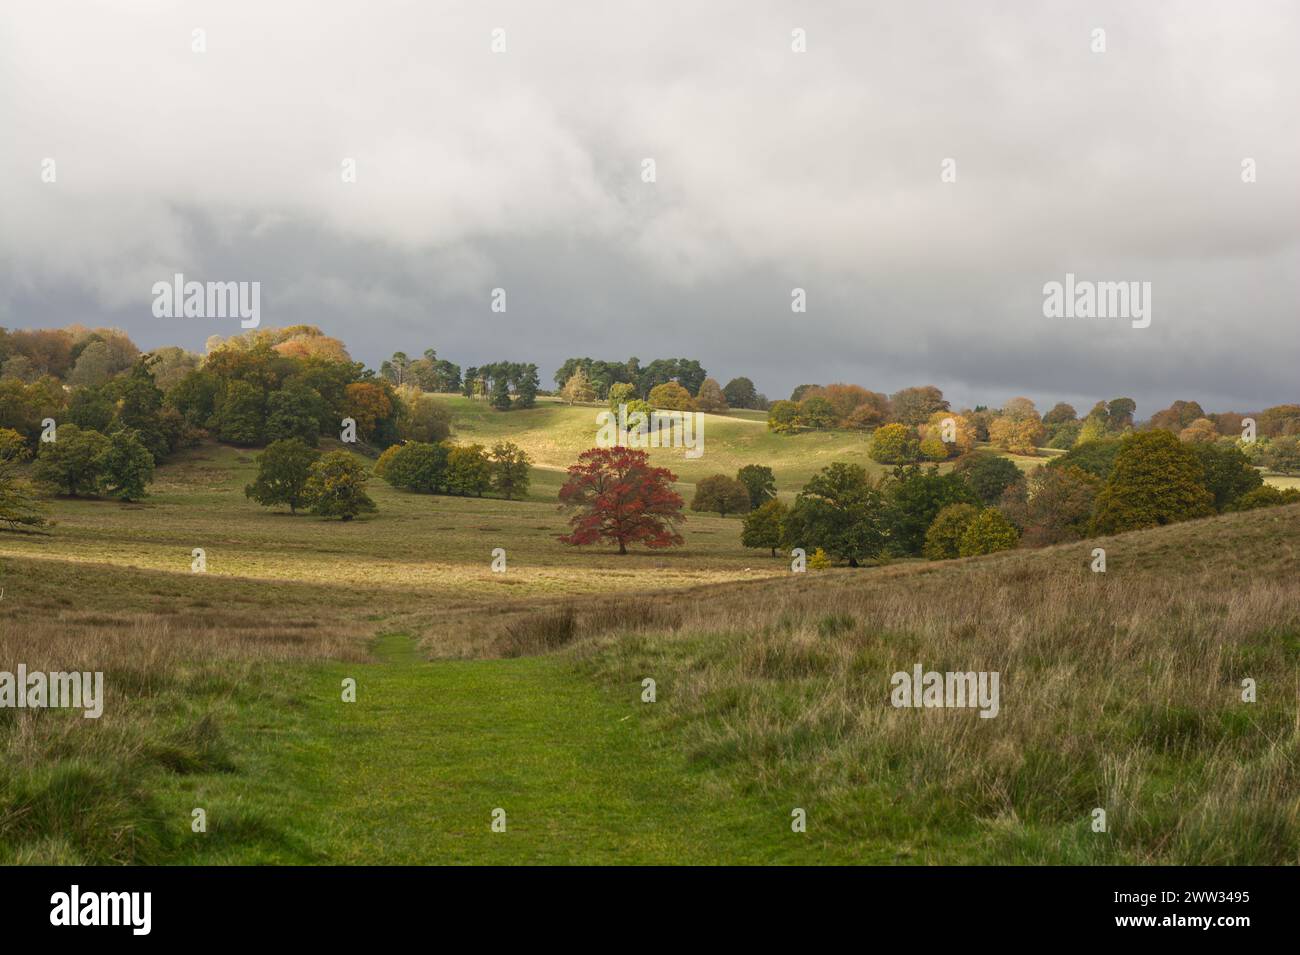 Typical English parkland and countryside with grass and trees. Beginning of Autumn (Fall). Stock Photo